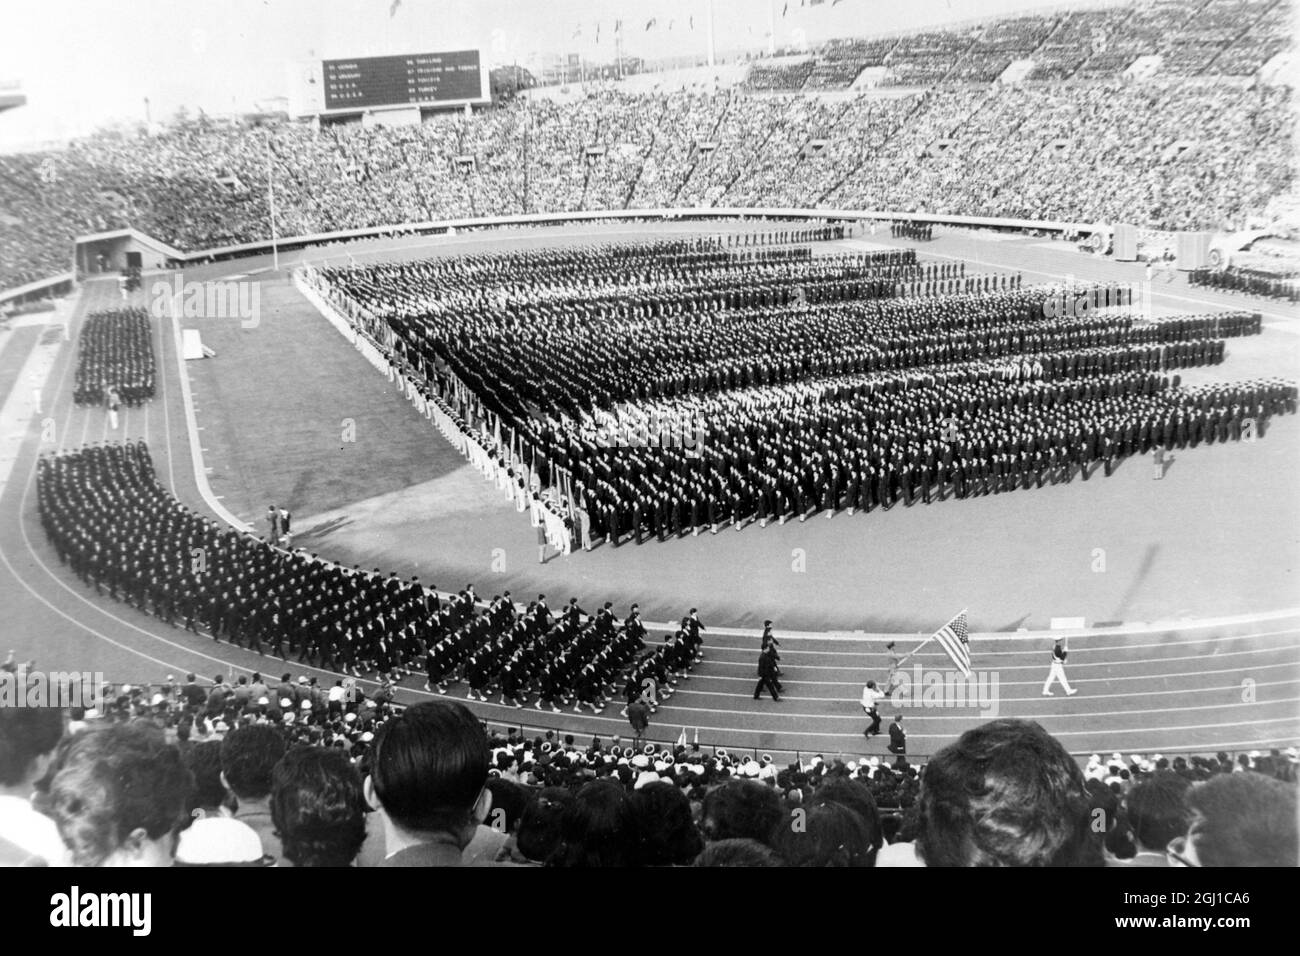 OLYMPICS, OLYMPIC SPORT GAMES - THE XVIII 18TH OLYMPIAD IN TOKYO, JAPAN - DRESS REHERSAL JAPANESE SCHOOLCHILDREN TAKE ATHLETE PLACES ; 3 OCTOBER 1964 Stock Photo